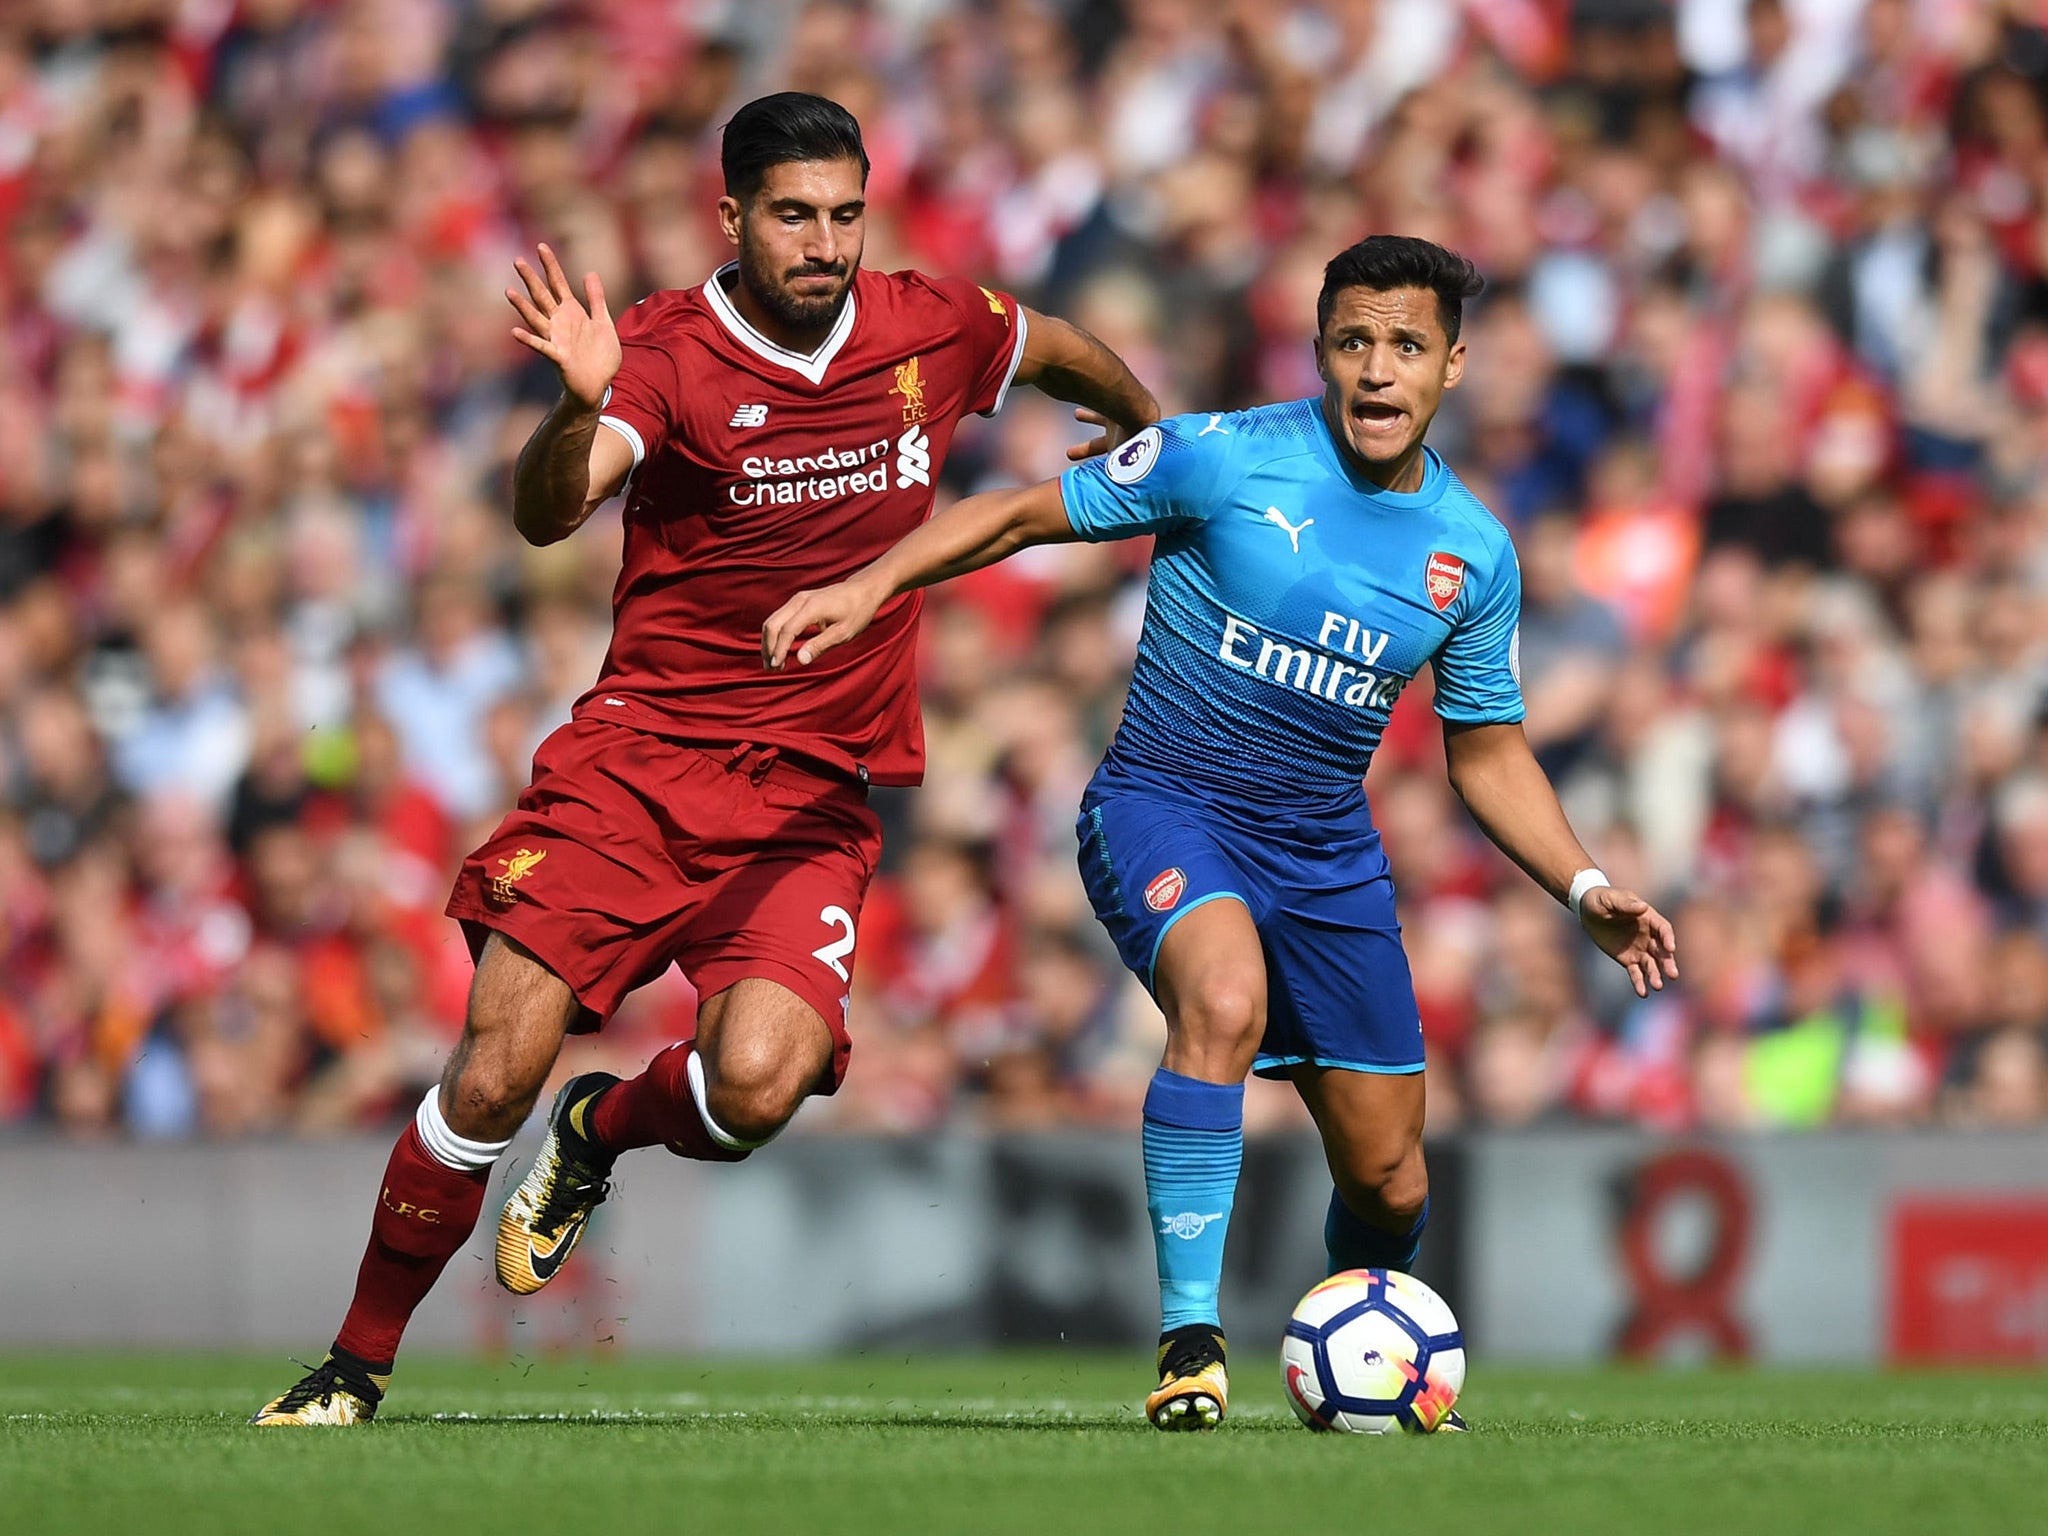 Liverpool thrashed Arsenal at Anfield back in August